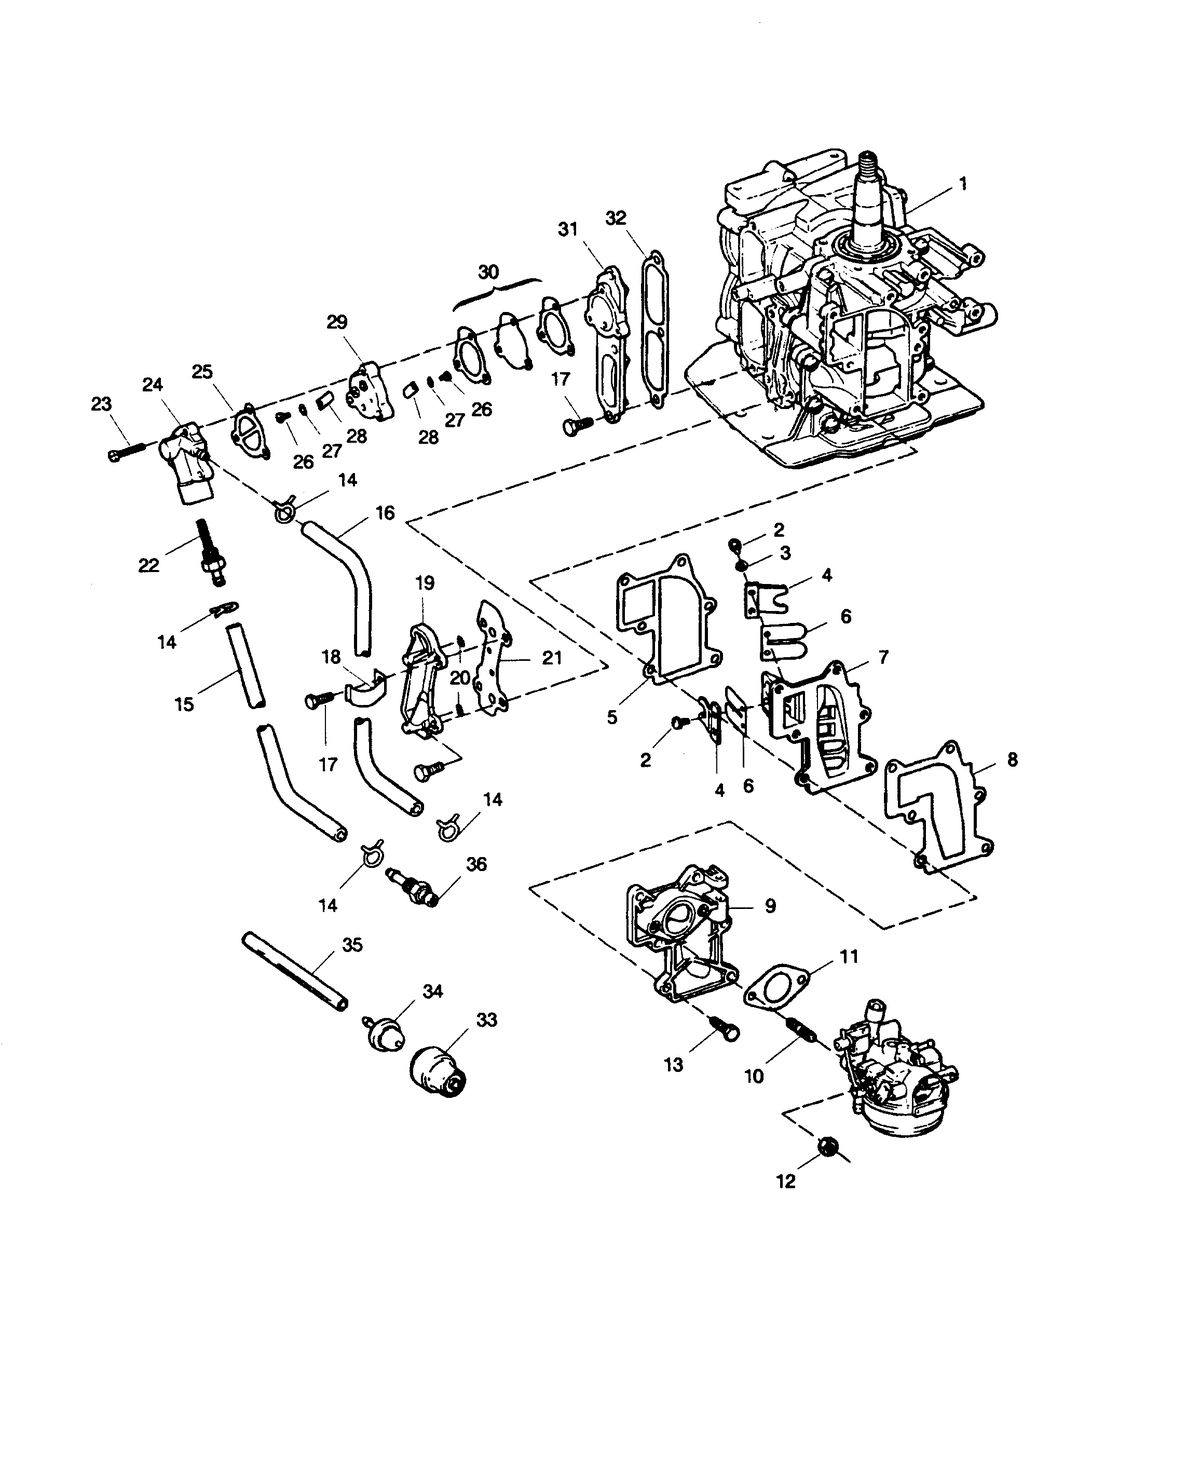 SEARS SEARS 7.5 H.P. FUEL INTAKE AND RECIRCULATION SYSTEM